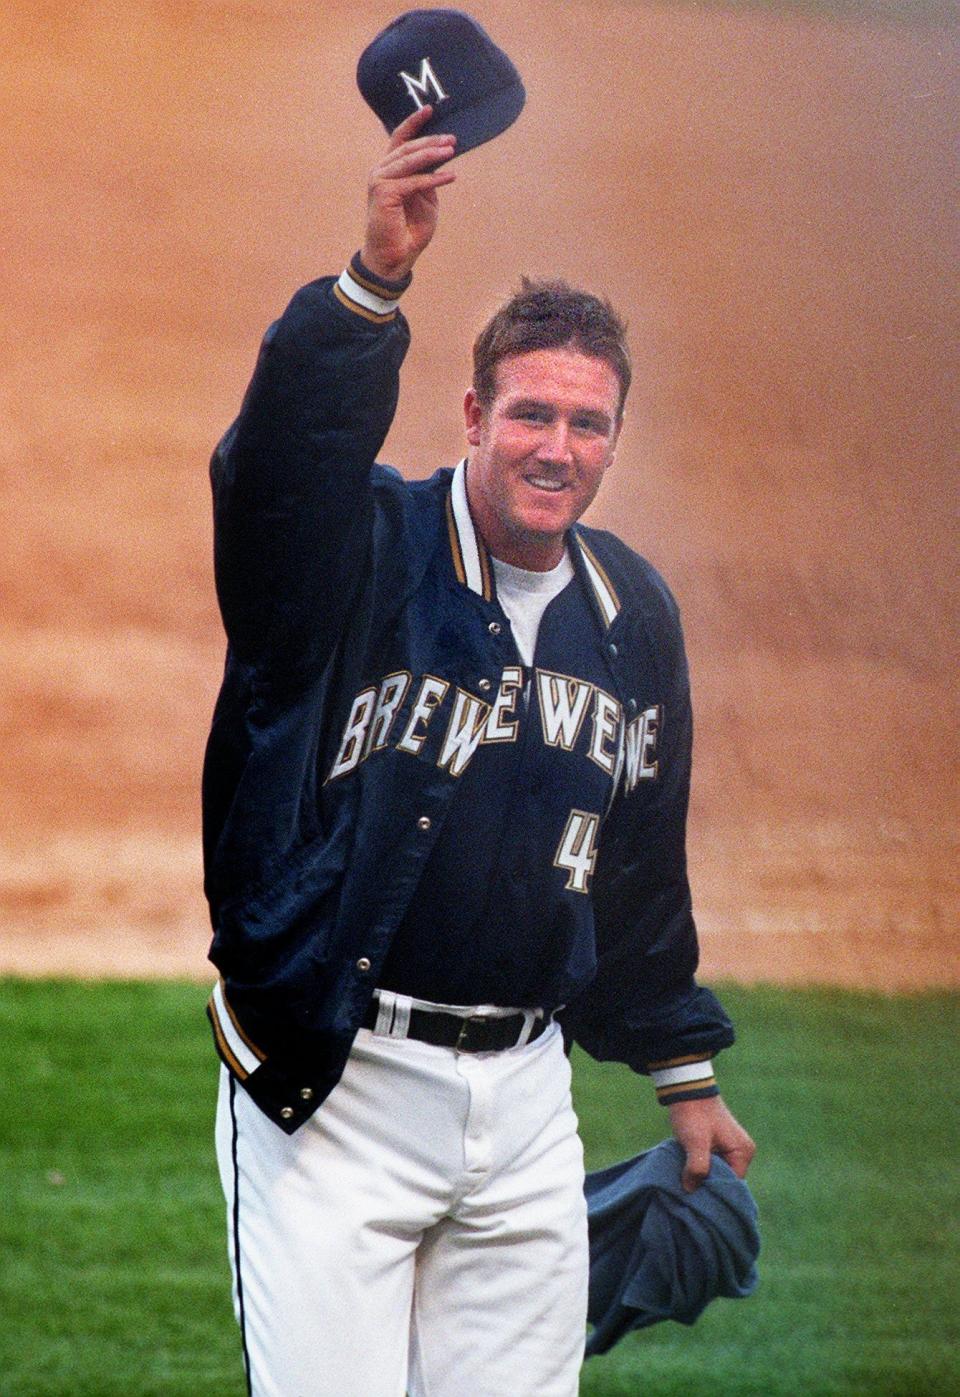 Steve Woodard waves to the fans at County Stadium Monday, July 28,1997 in Milwaukee. In his Major League debut, Woodard struck out 12 batters, giving the Brewers a 1-0 victory over the Toronto Blue Jays.